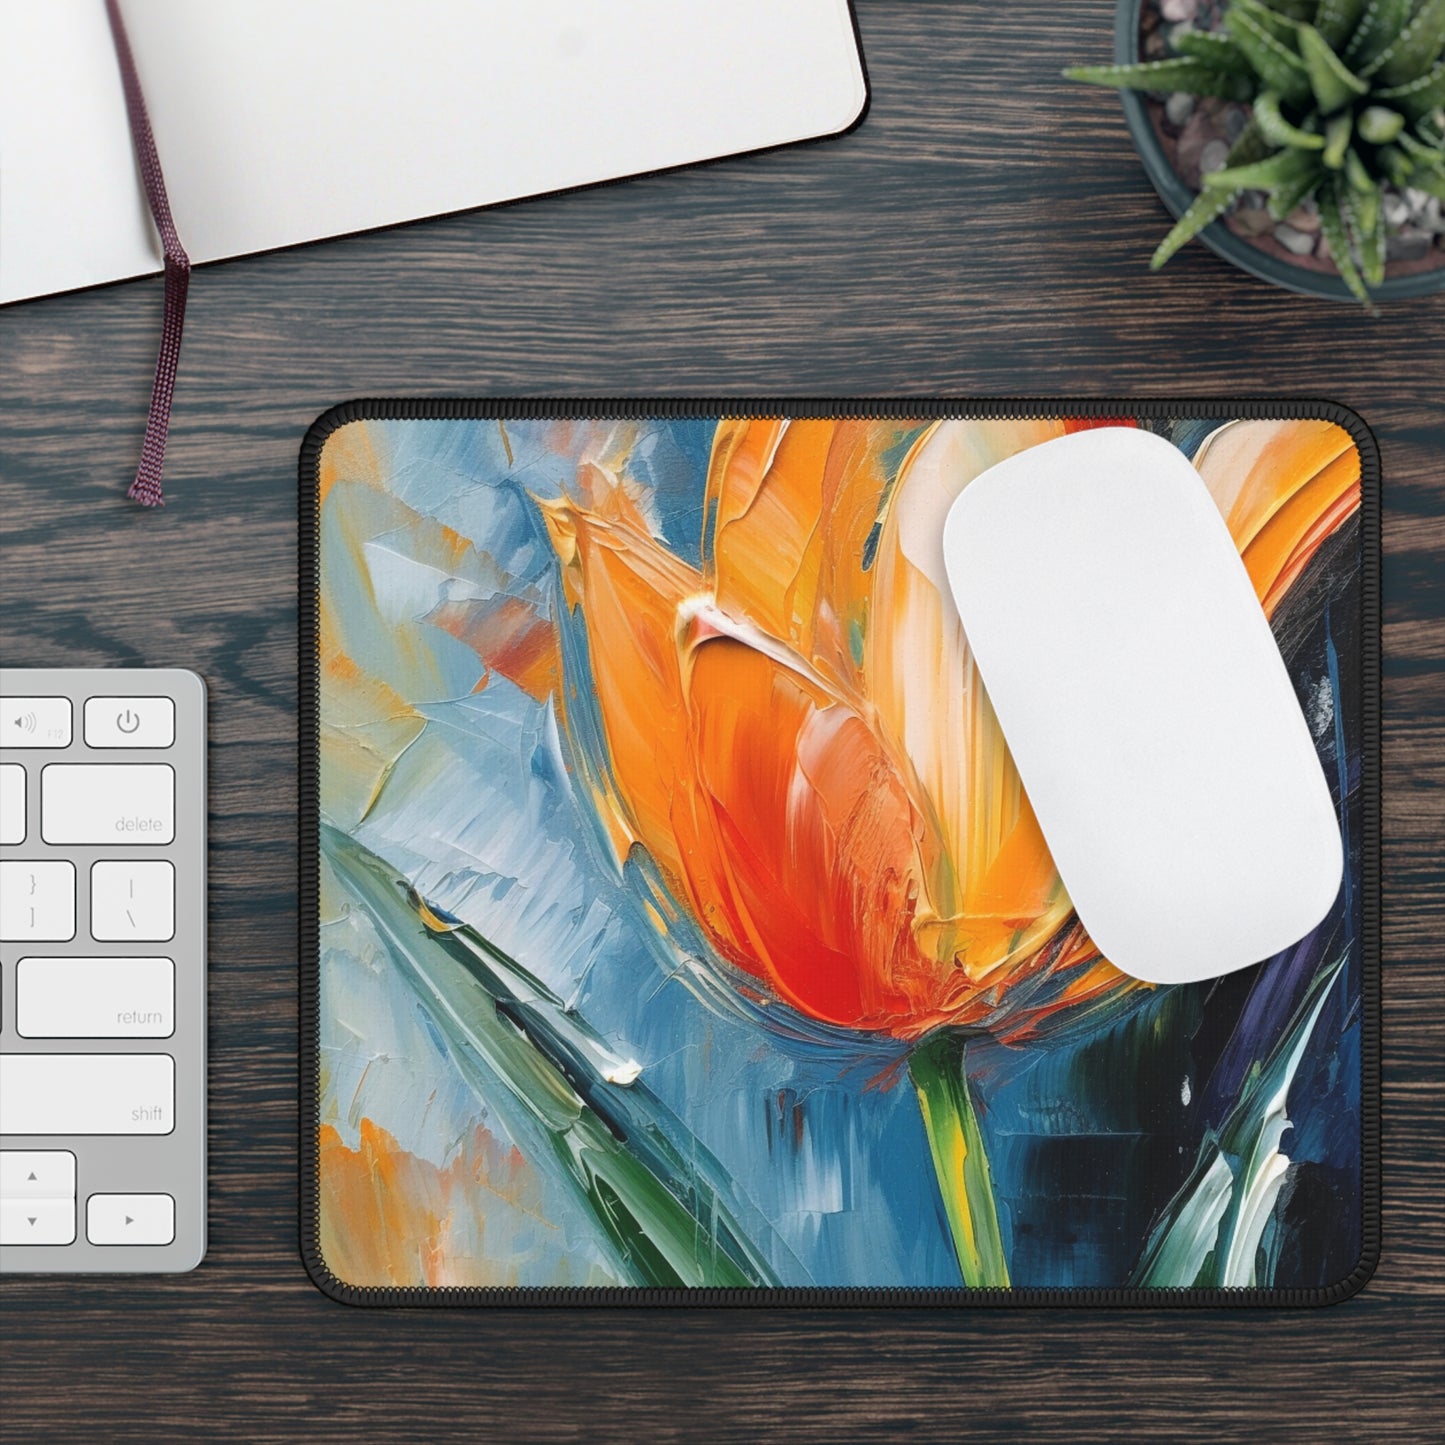 Orange Tulip Magic on Gaming Mouse Pad: A Blossoming Artistic Delight